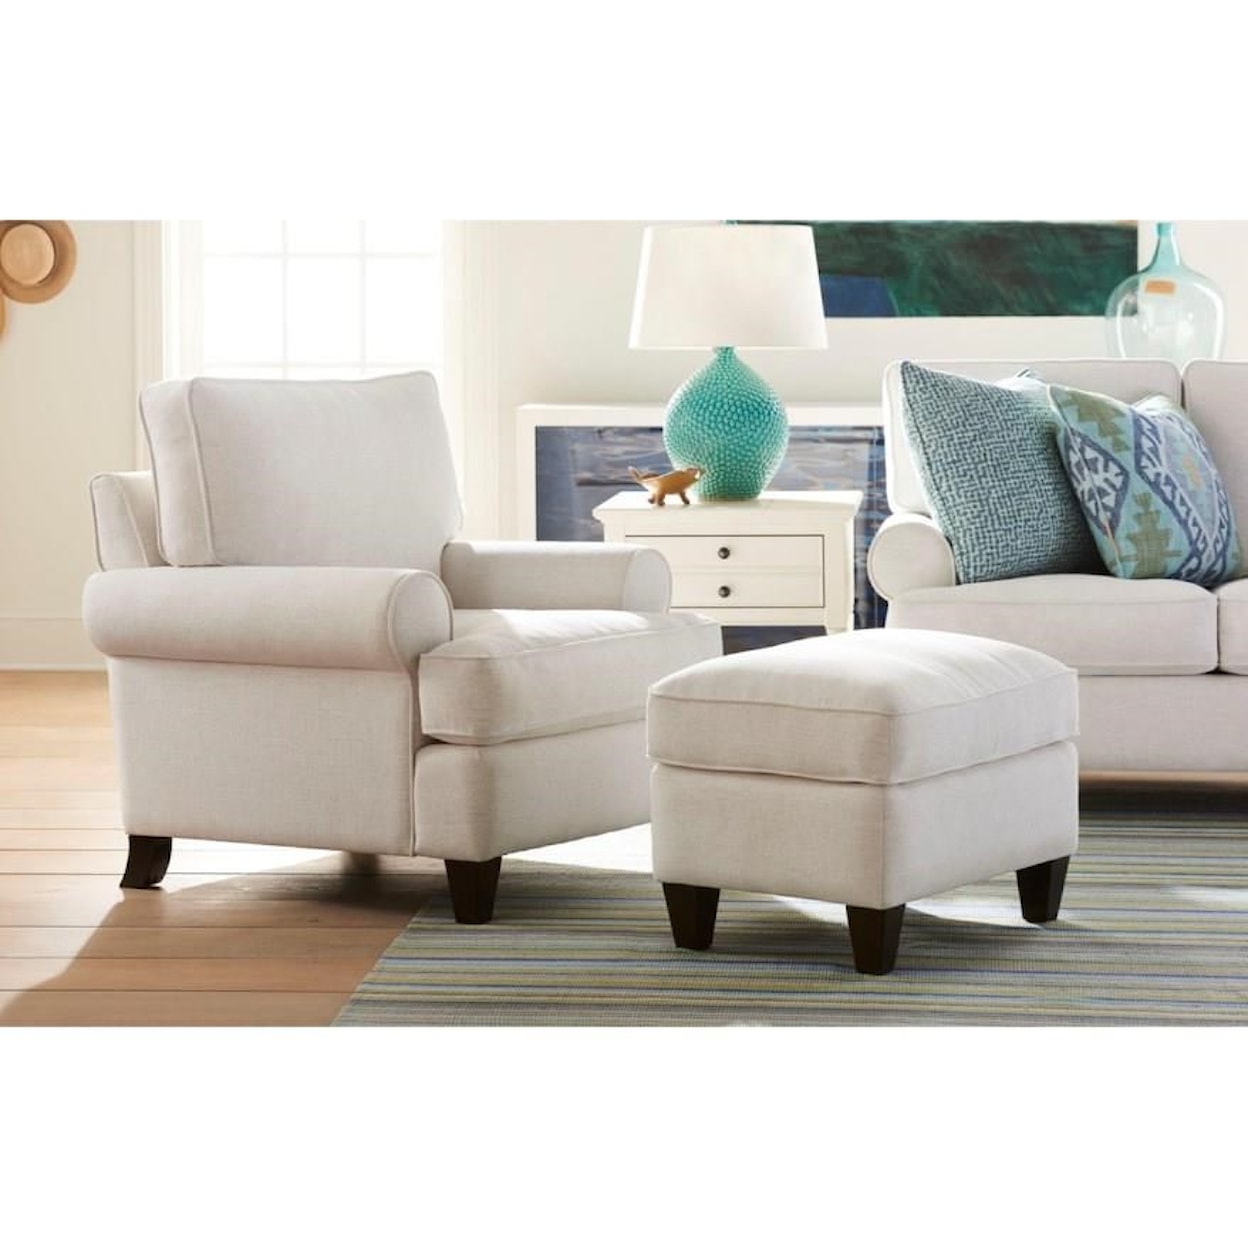 Universal Blakely Chair and Ottoman